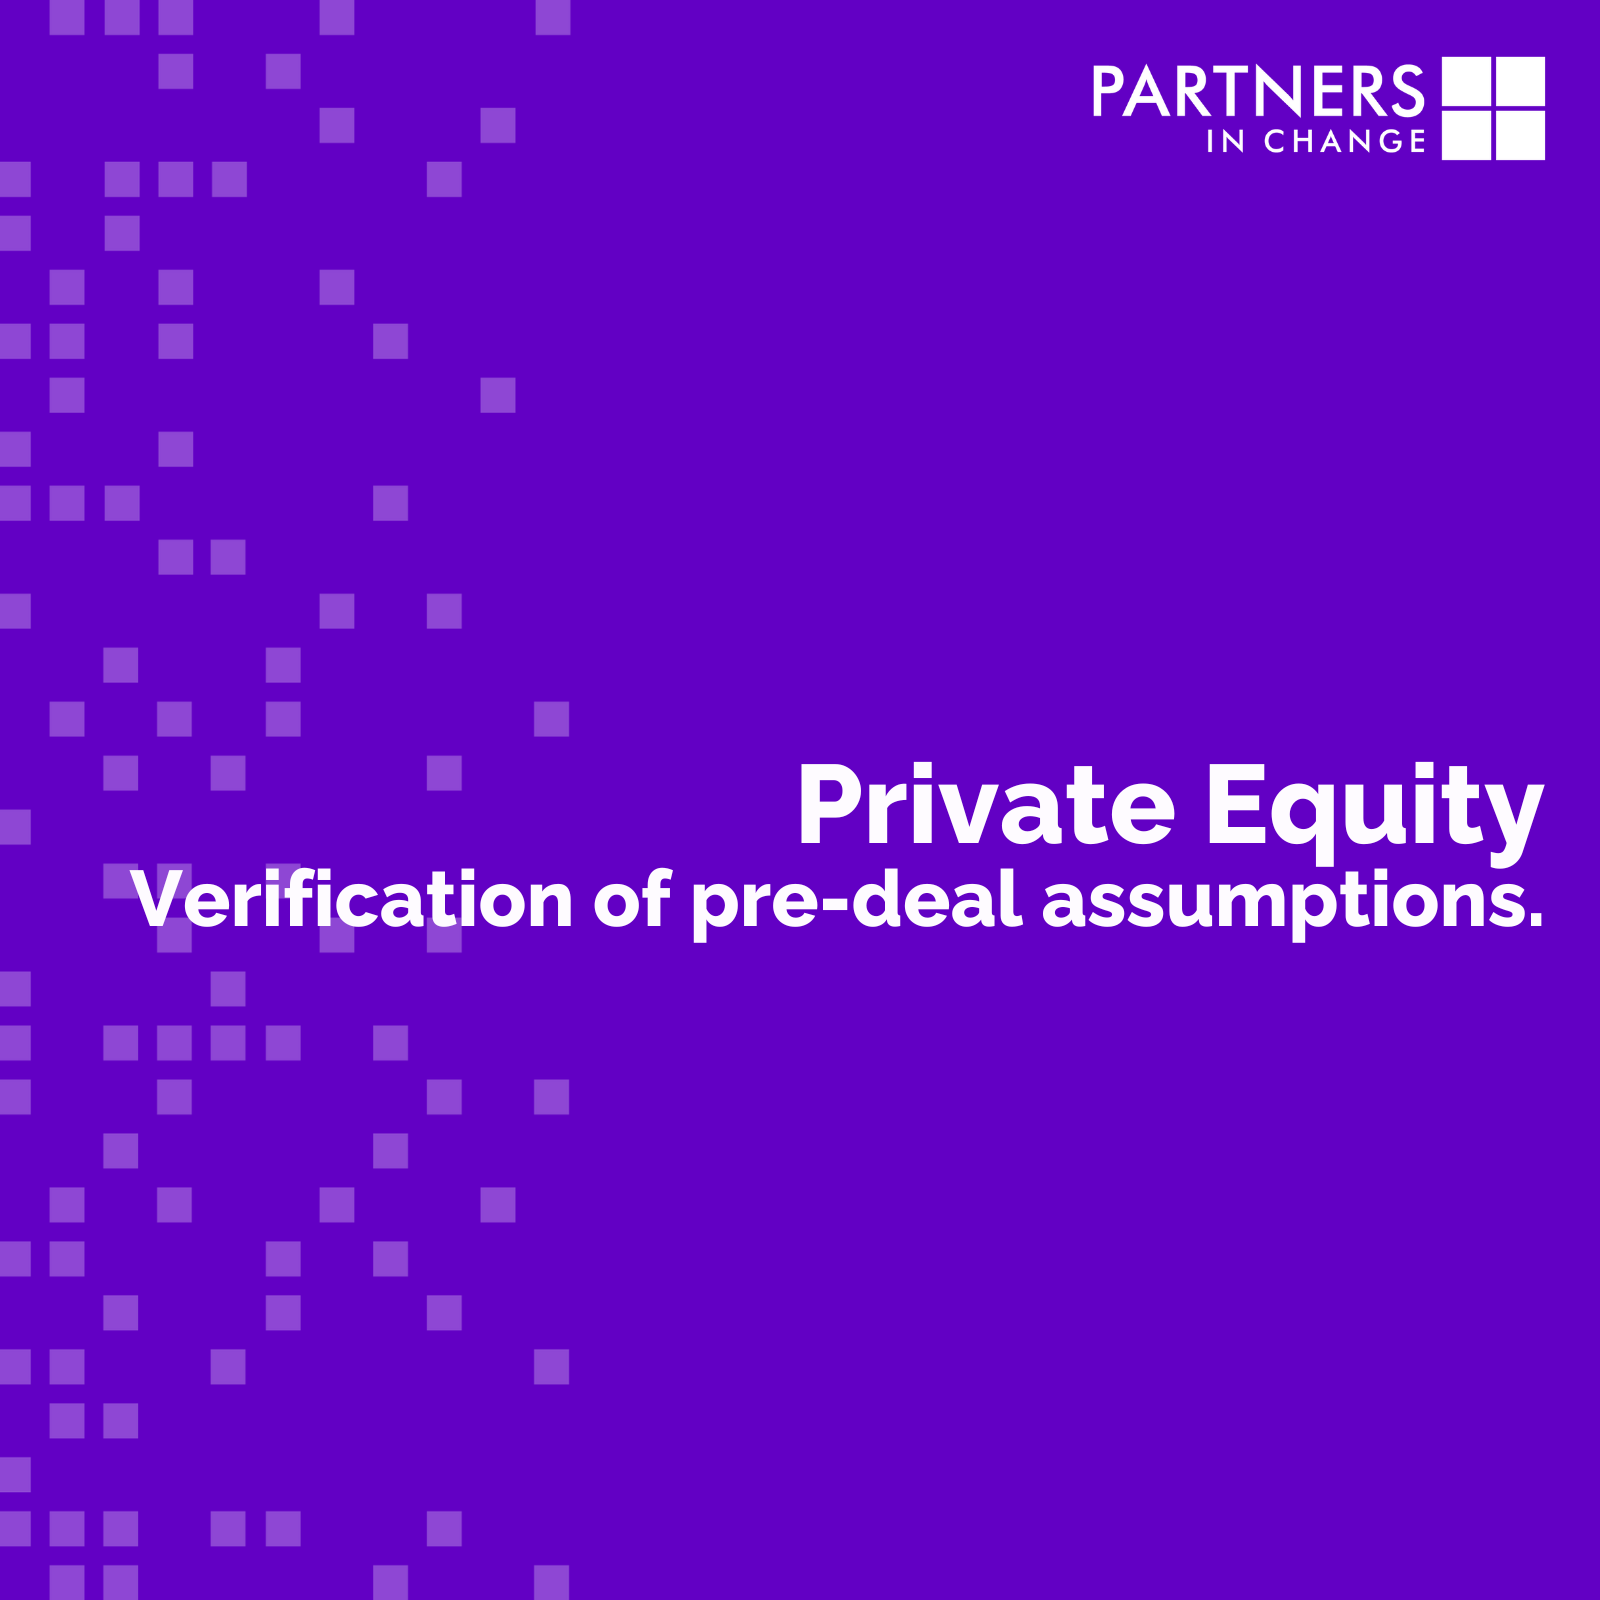 Verification of pre-deal assumptions in Private Equity acquisition integration.